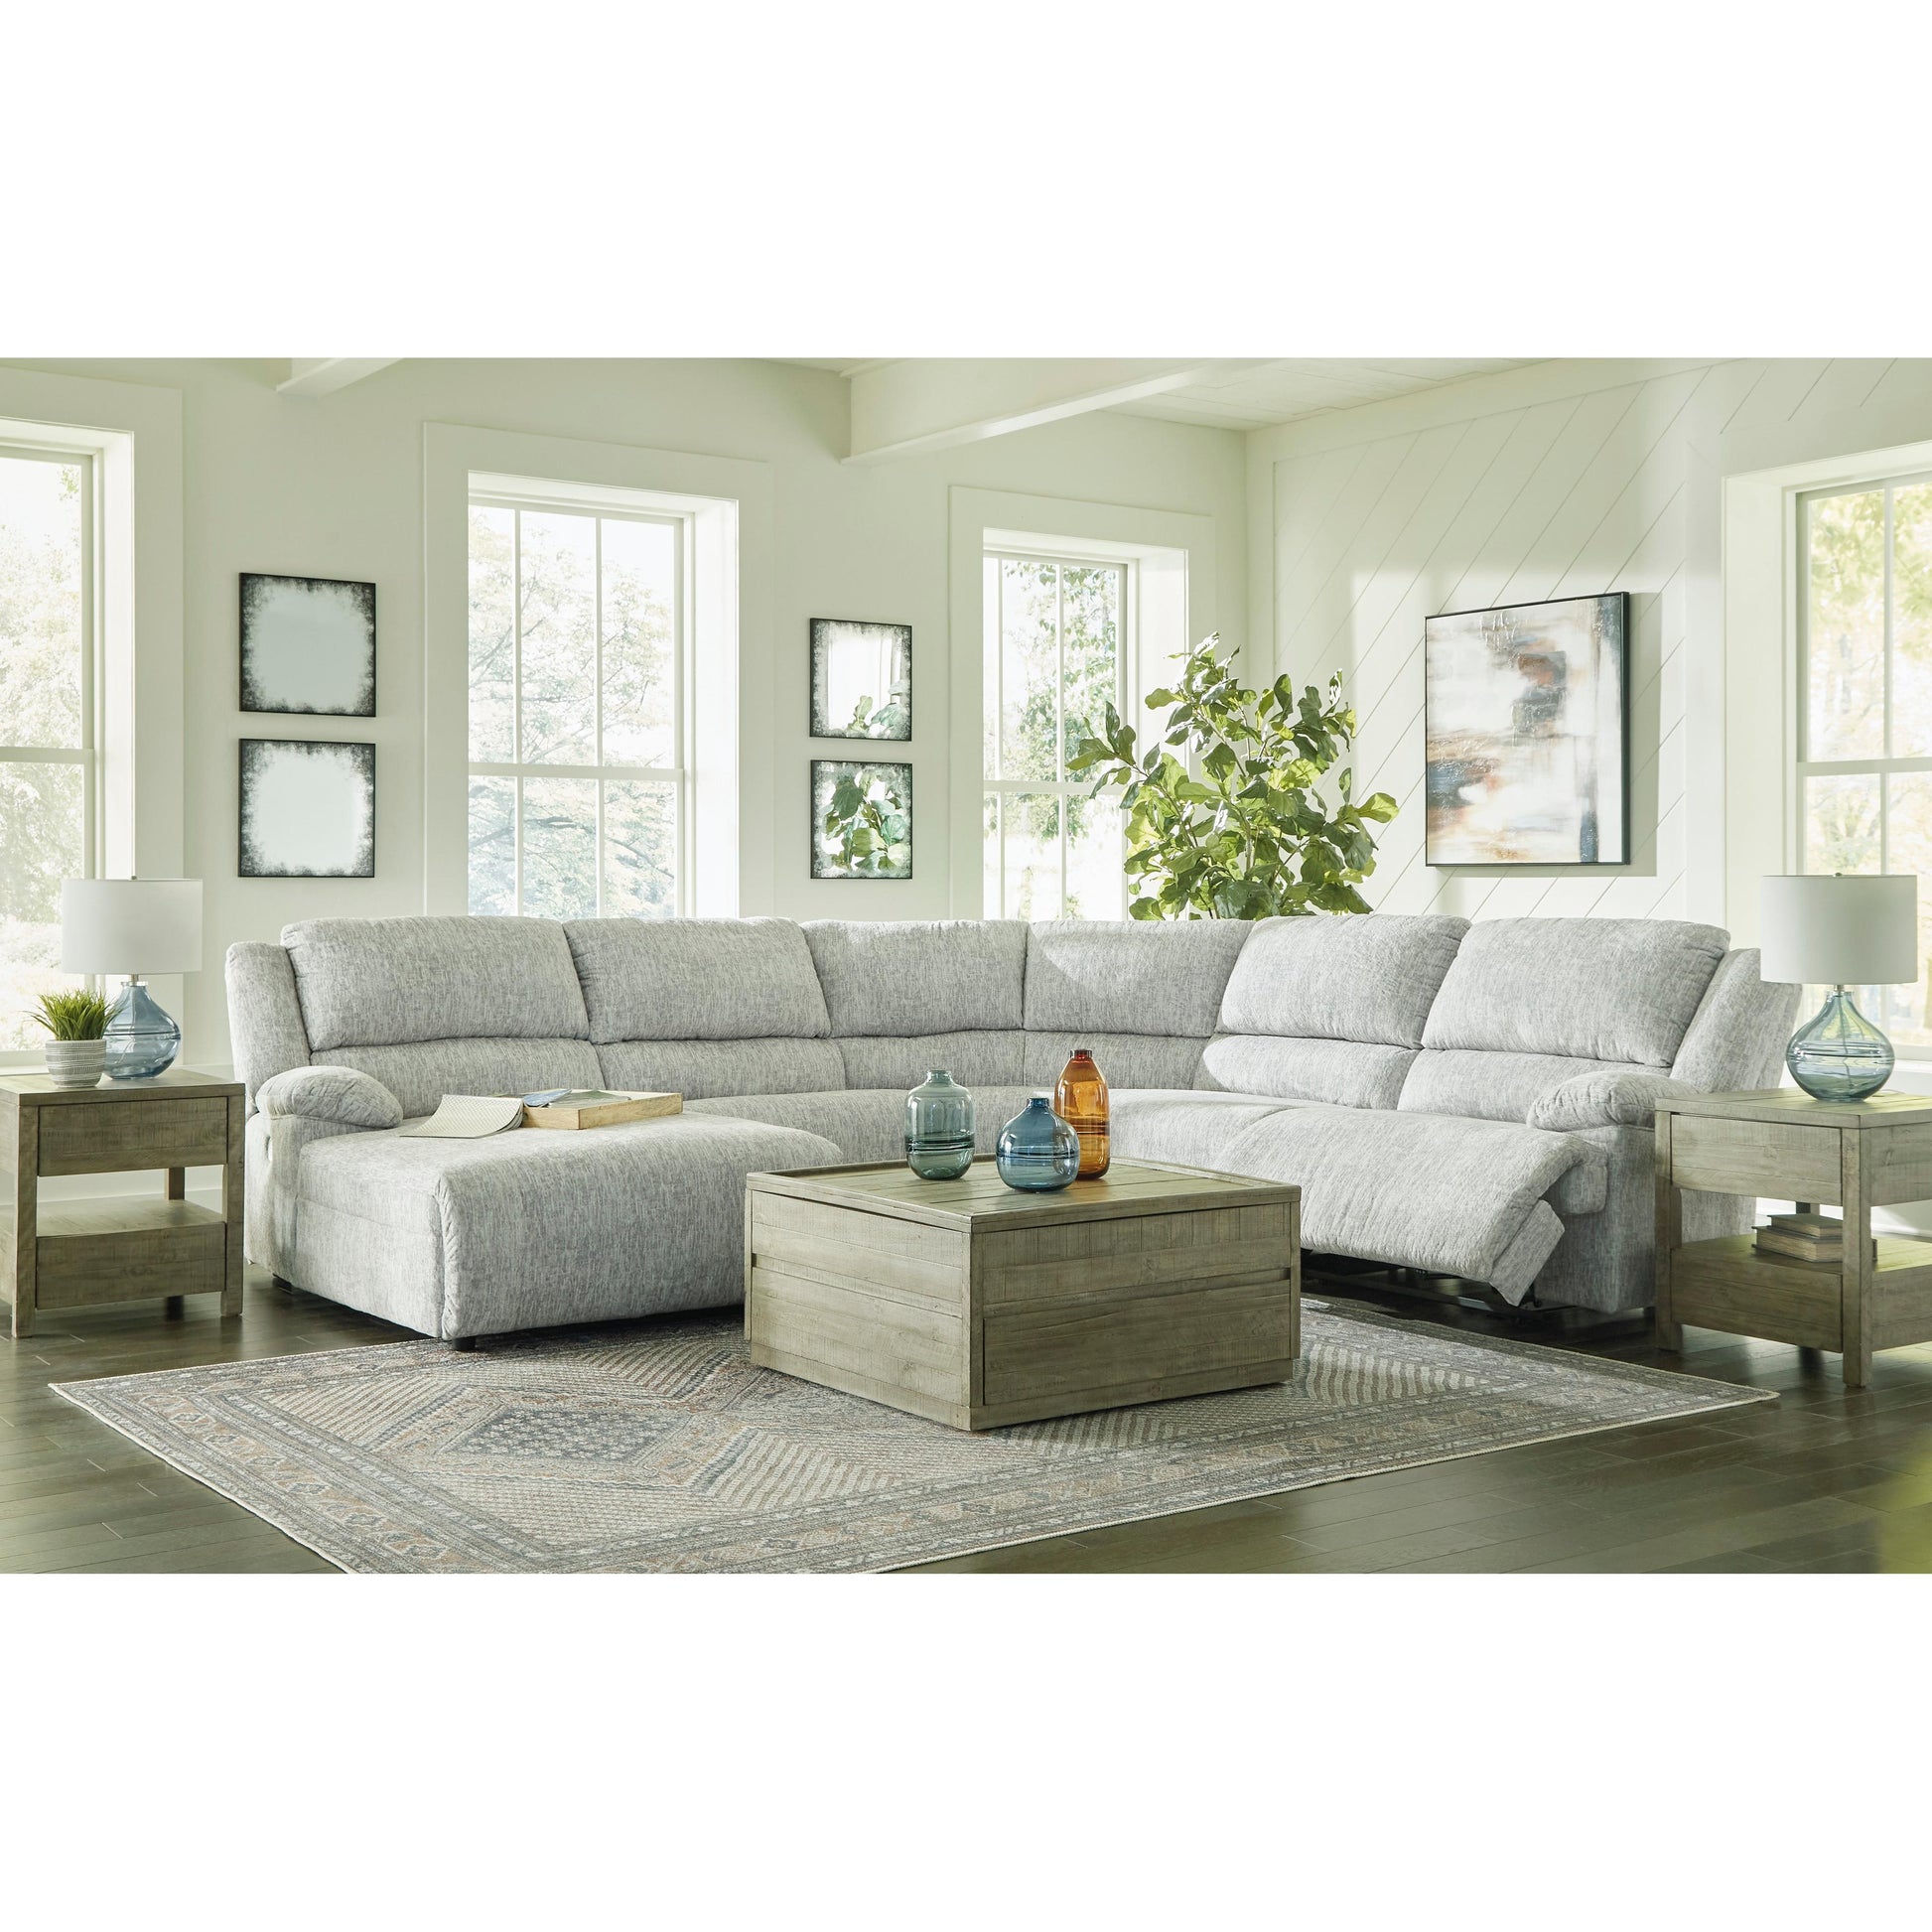 Signature Design by Ashley McClelland Power Reclining Fabric 5 pc Sectional 2930279/2930246/2930277/2930219/2930262 IMAGE 5